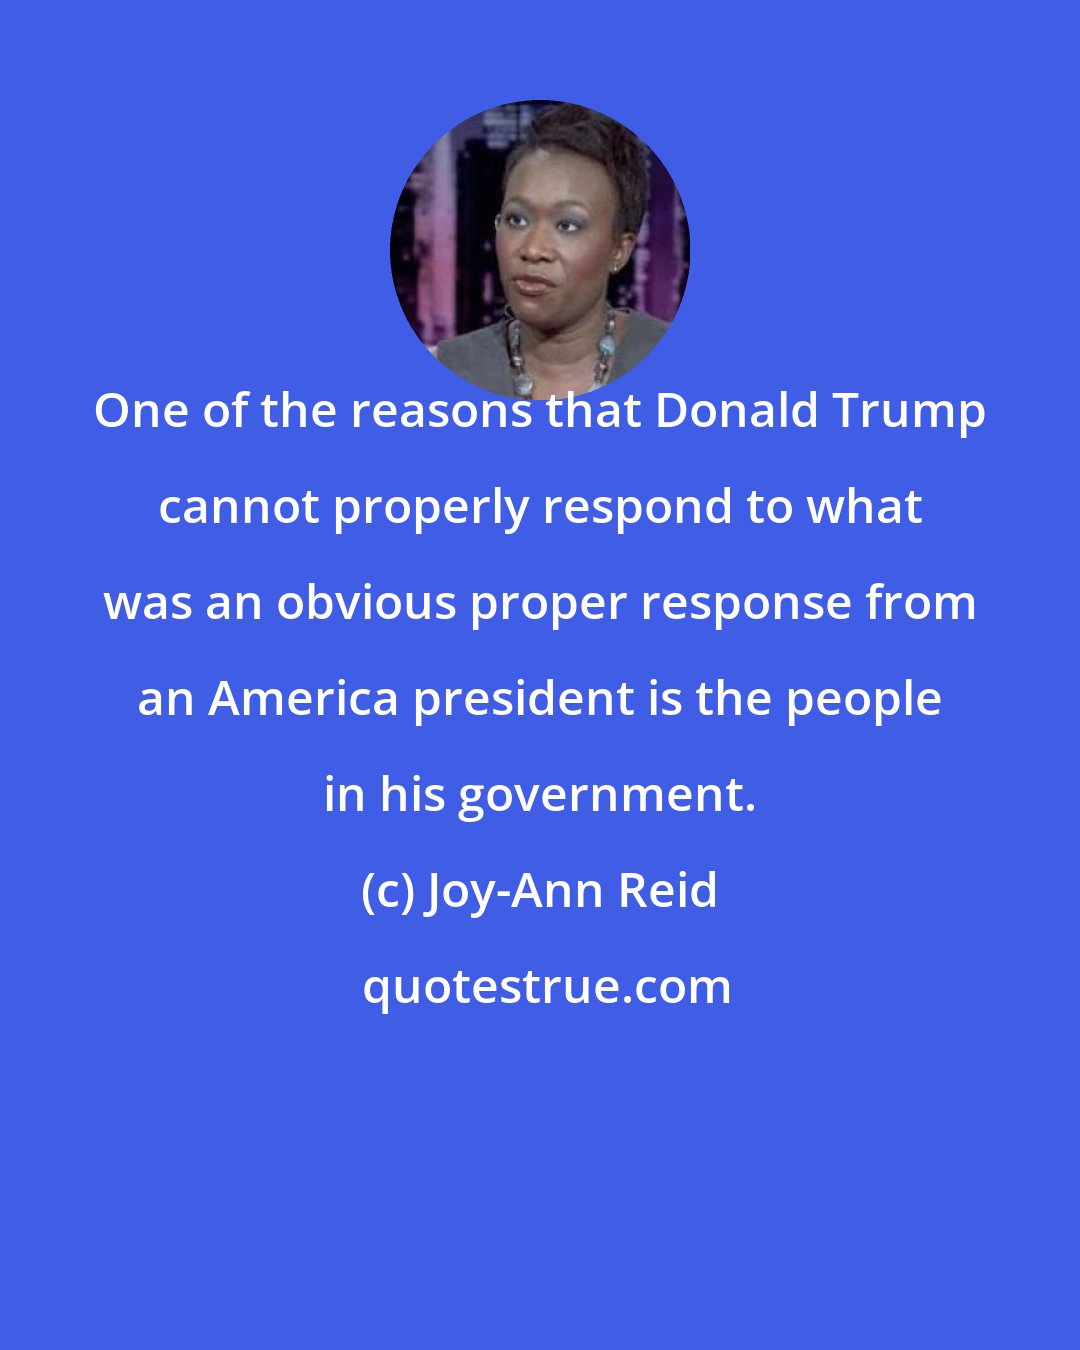 Joy-Ann Reid: One of the reasons that Donald Trump cannot properly respond to what was an obvious proper response from an America president is the people in his government.